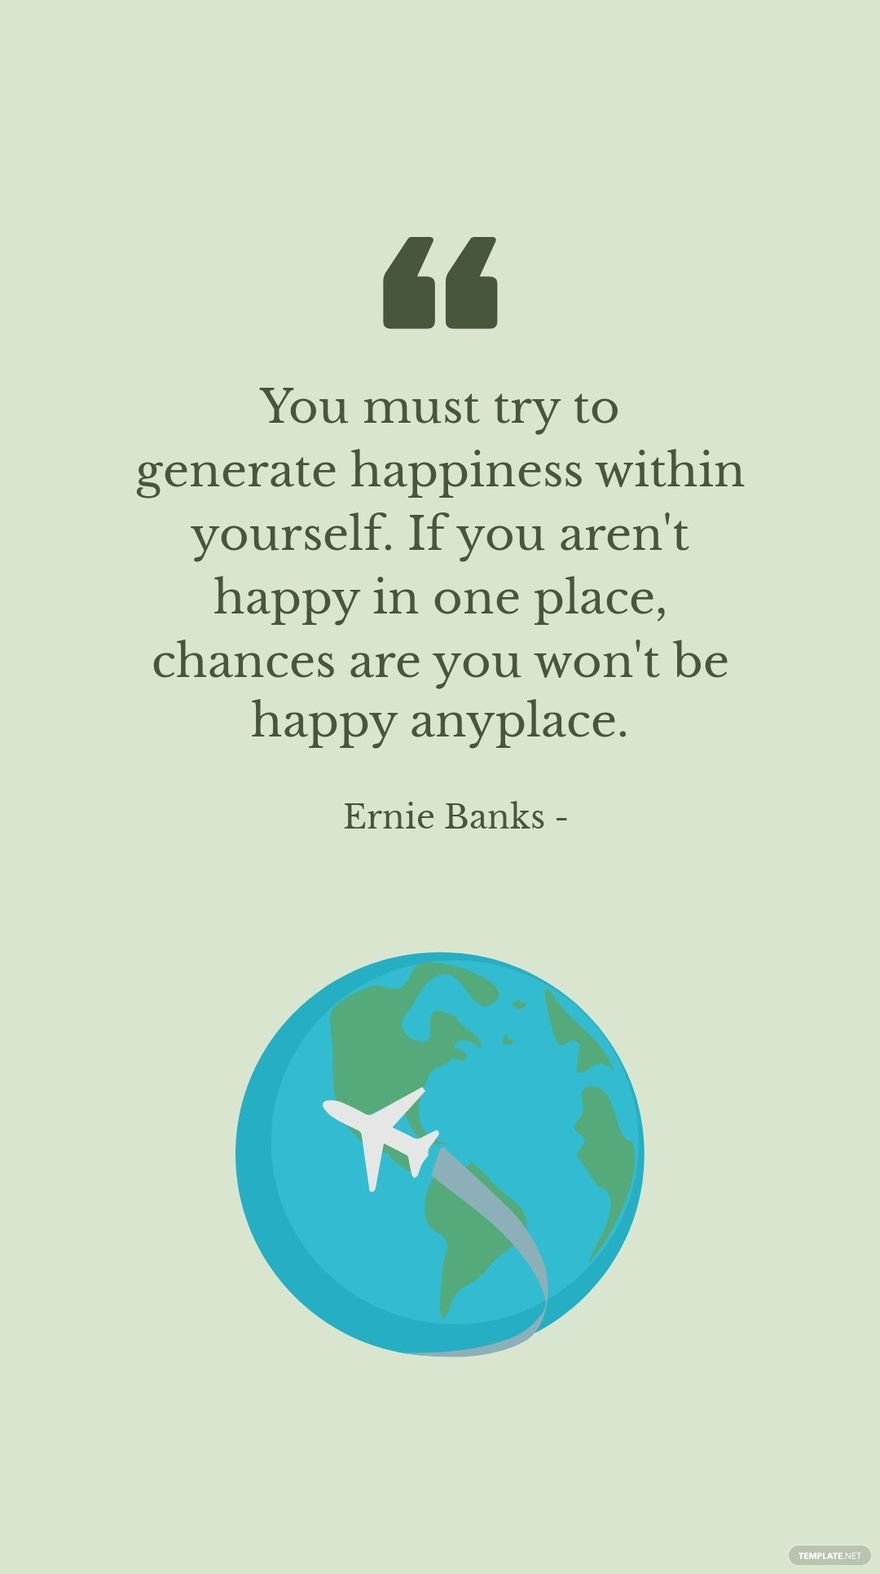 Ernie Banks - You must try to generate happiness within yourself. If you aren't happy in one place, chances are you won't be happy anyplace.